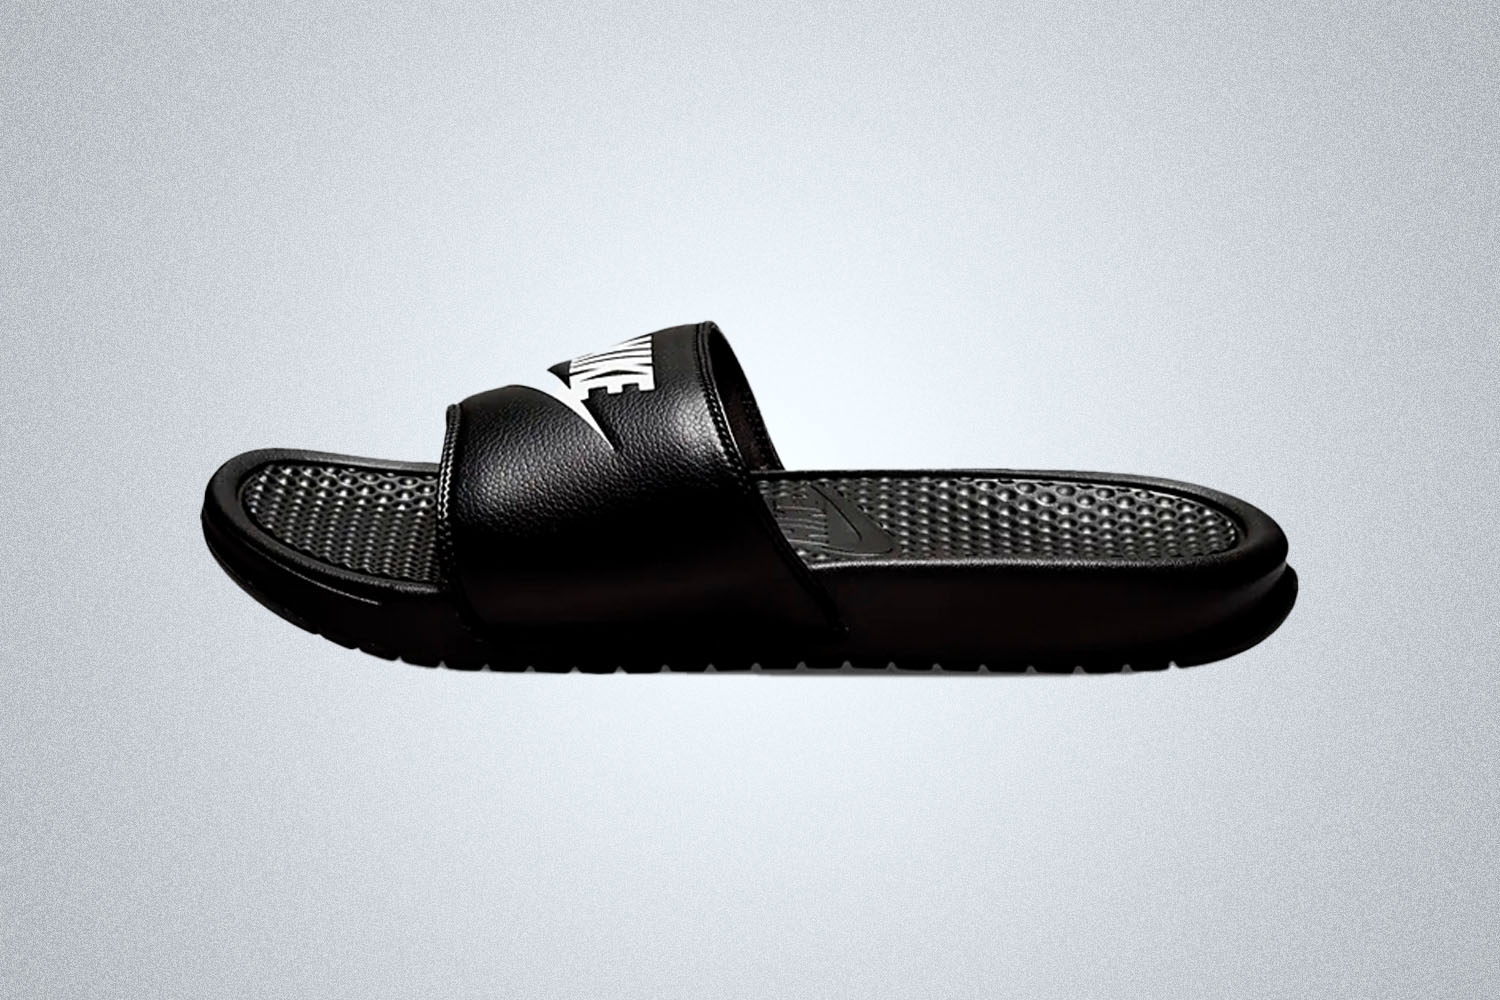 a pair of black Nike slides on a grey background